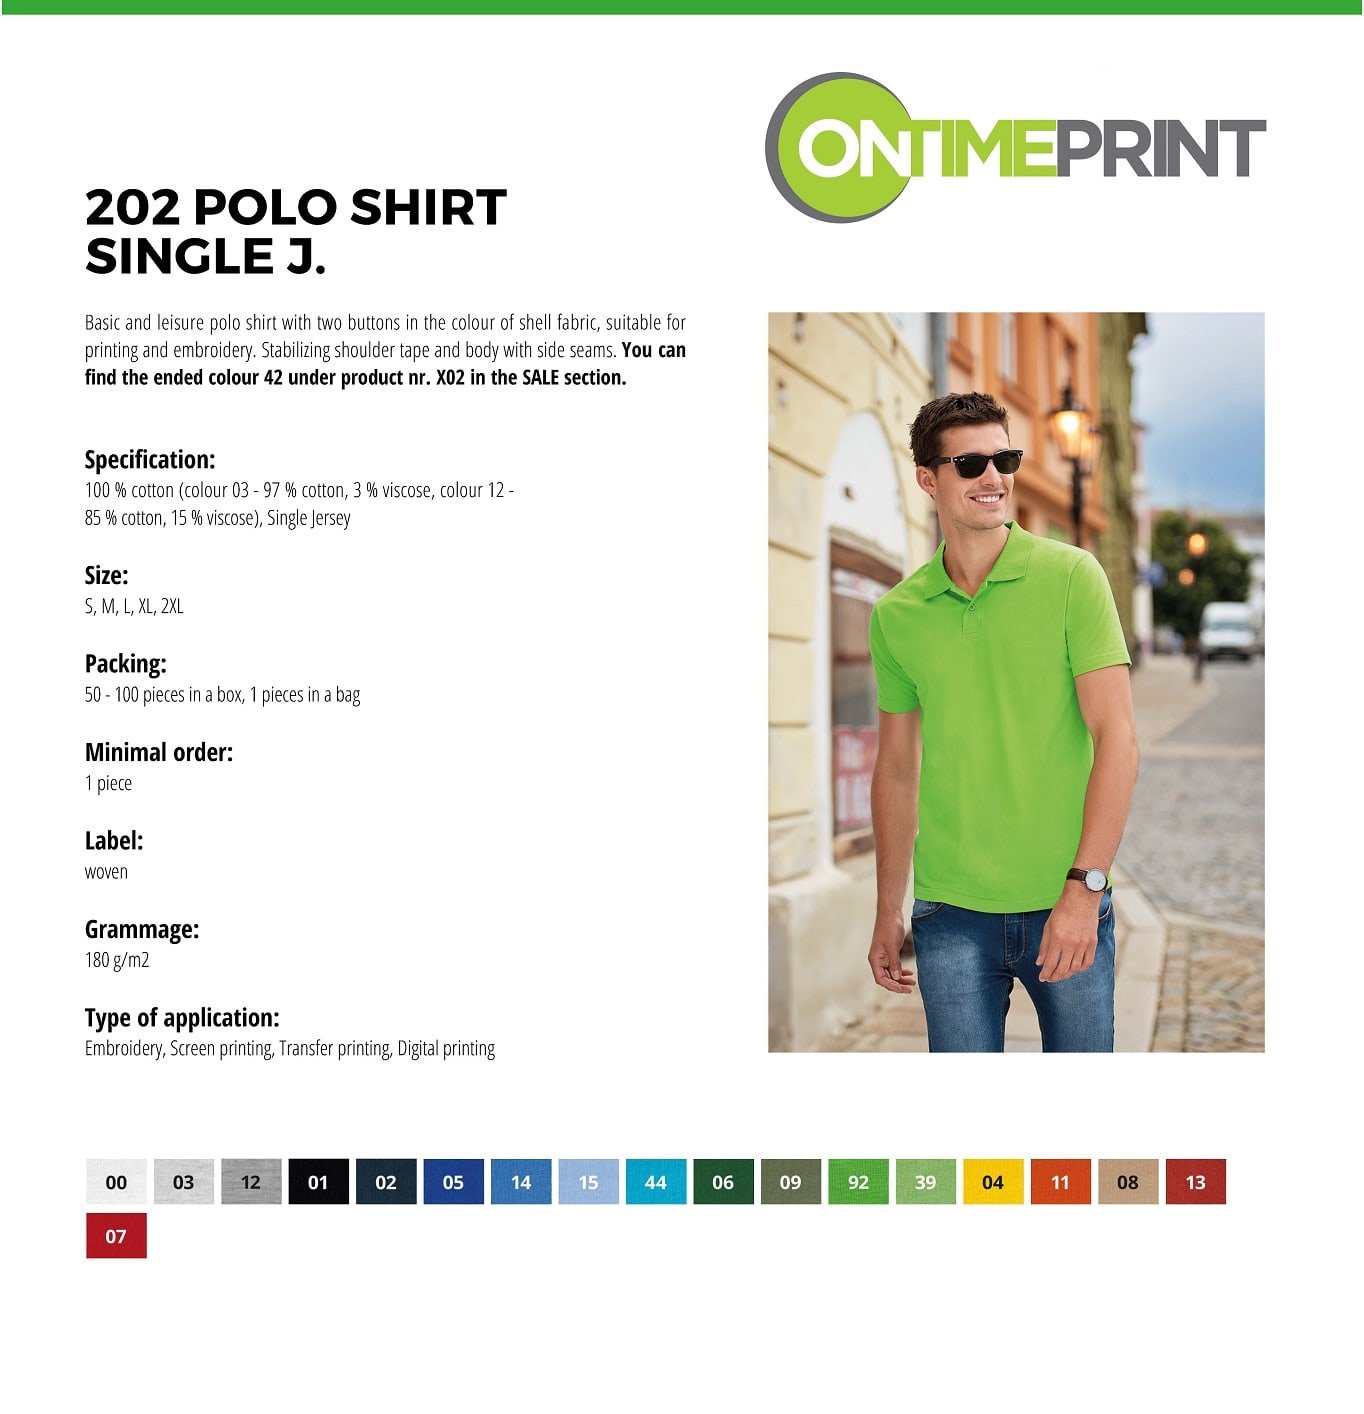 Custom Printed Promotional White Polo Shirts 202 specification- www.ontimeprint.co.uk